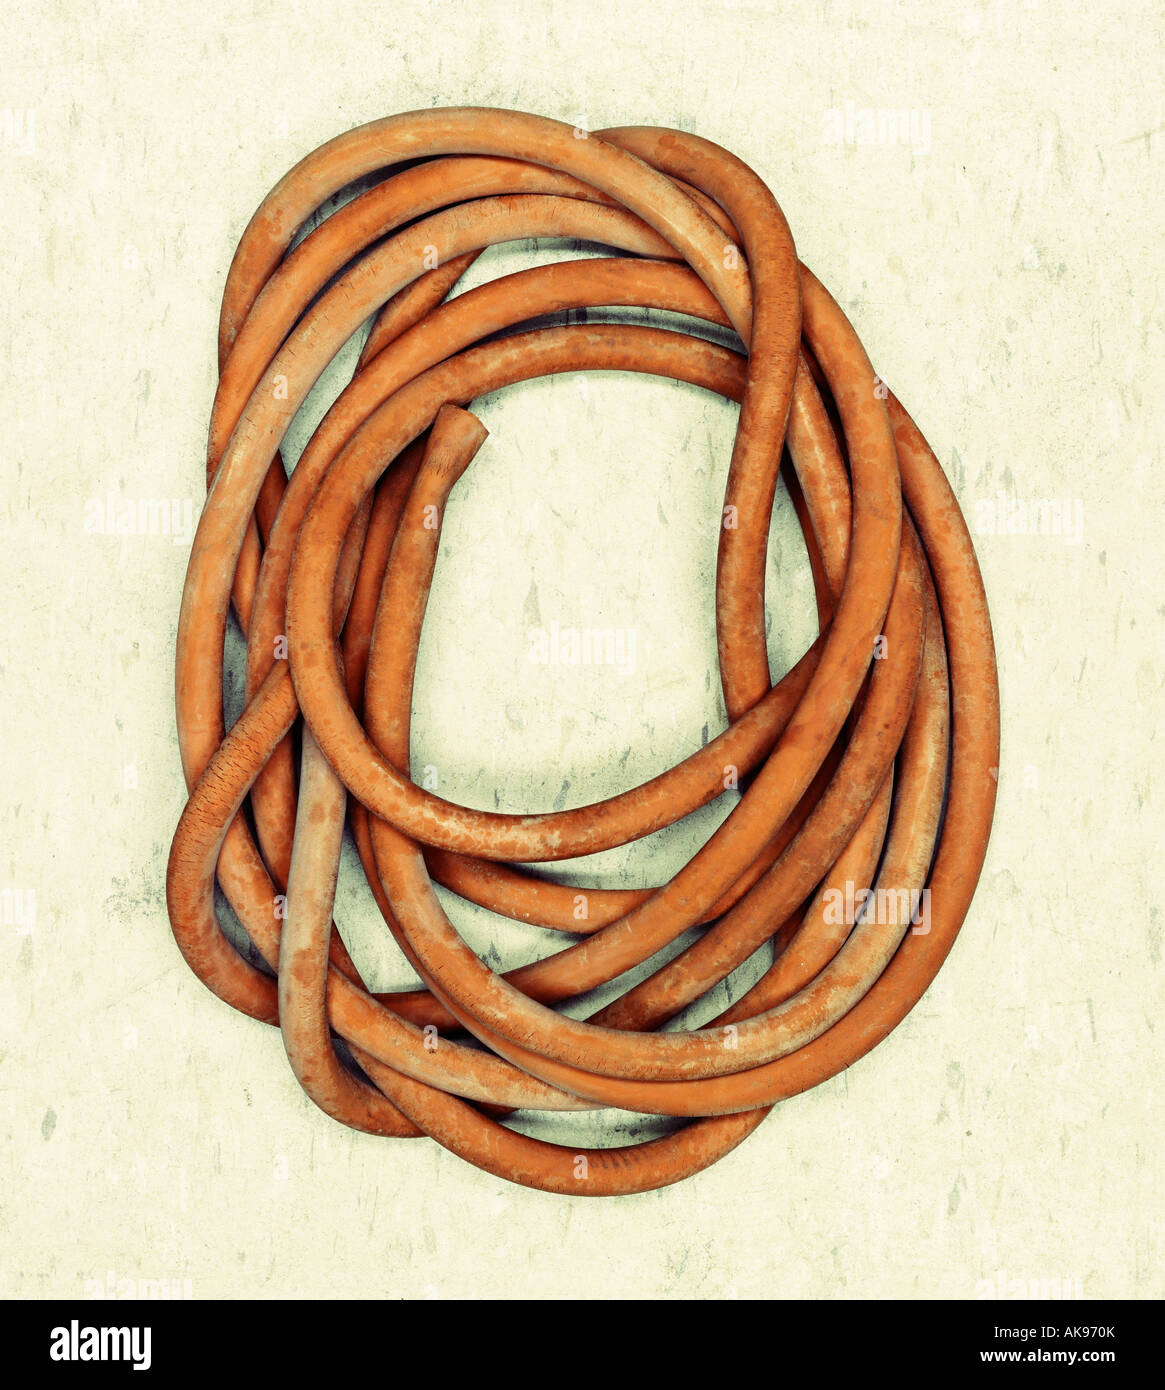 Coil of old rubber tubing Stock Photo